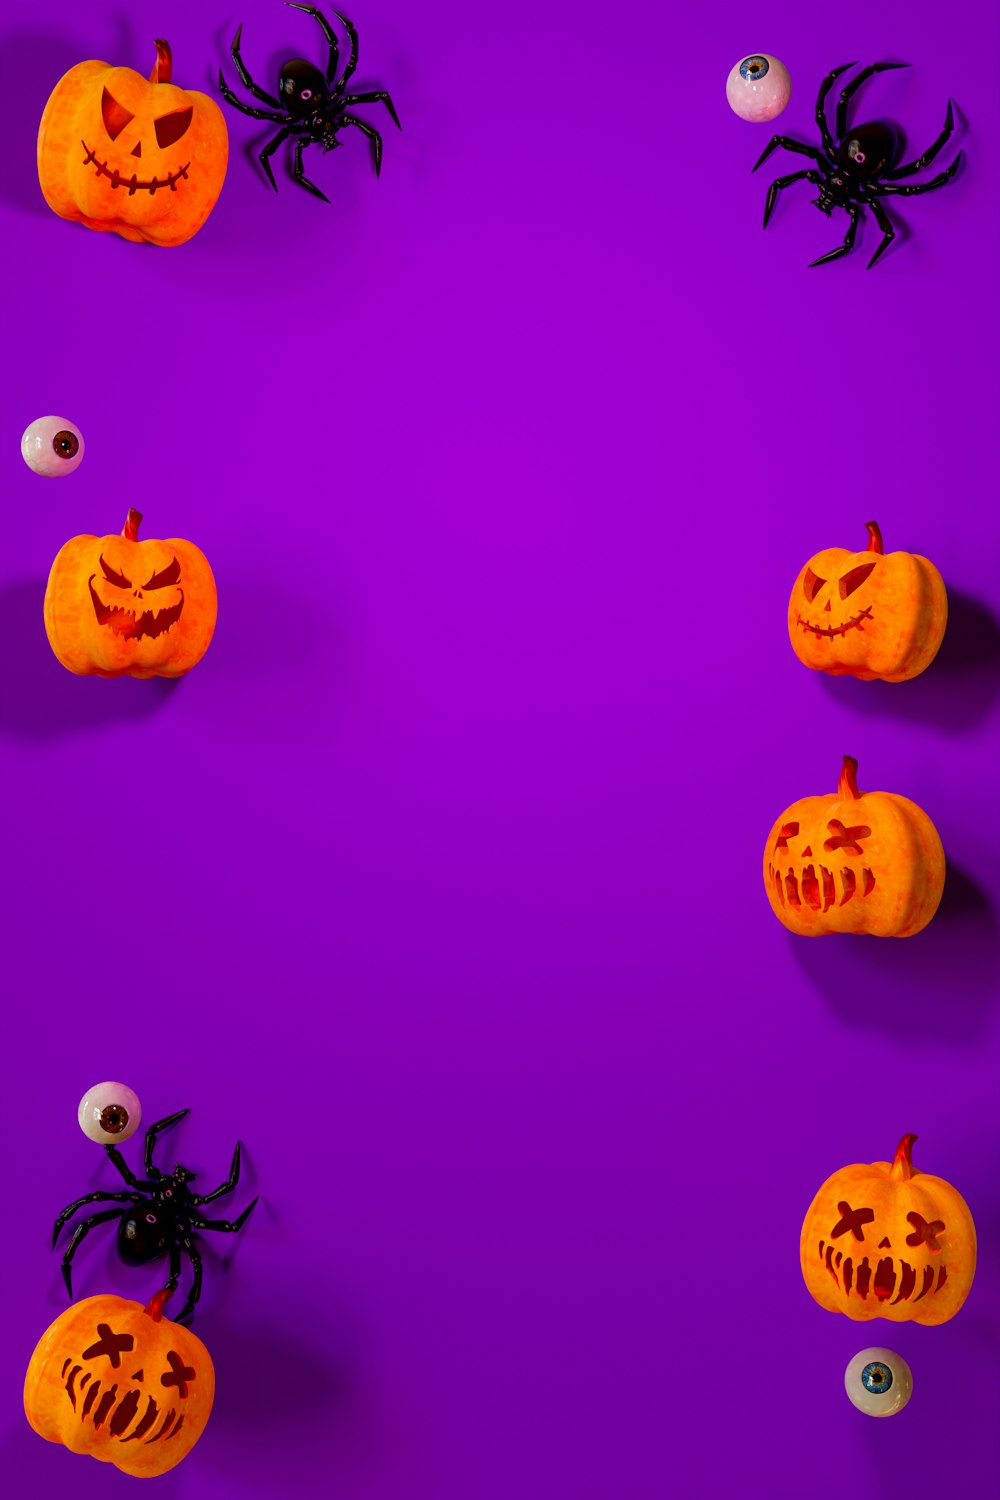 a purple background with pumpkins and a spider